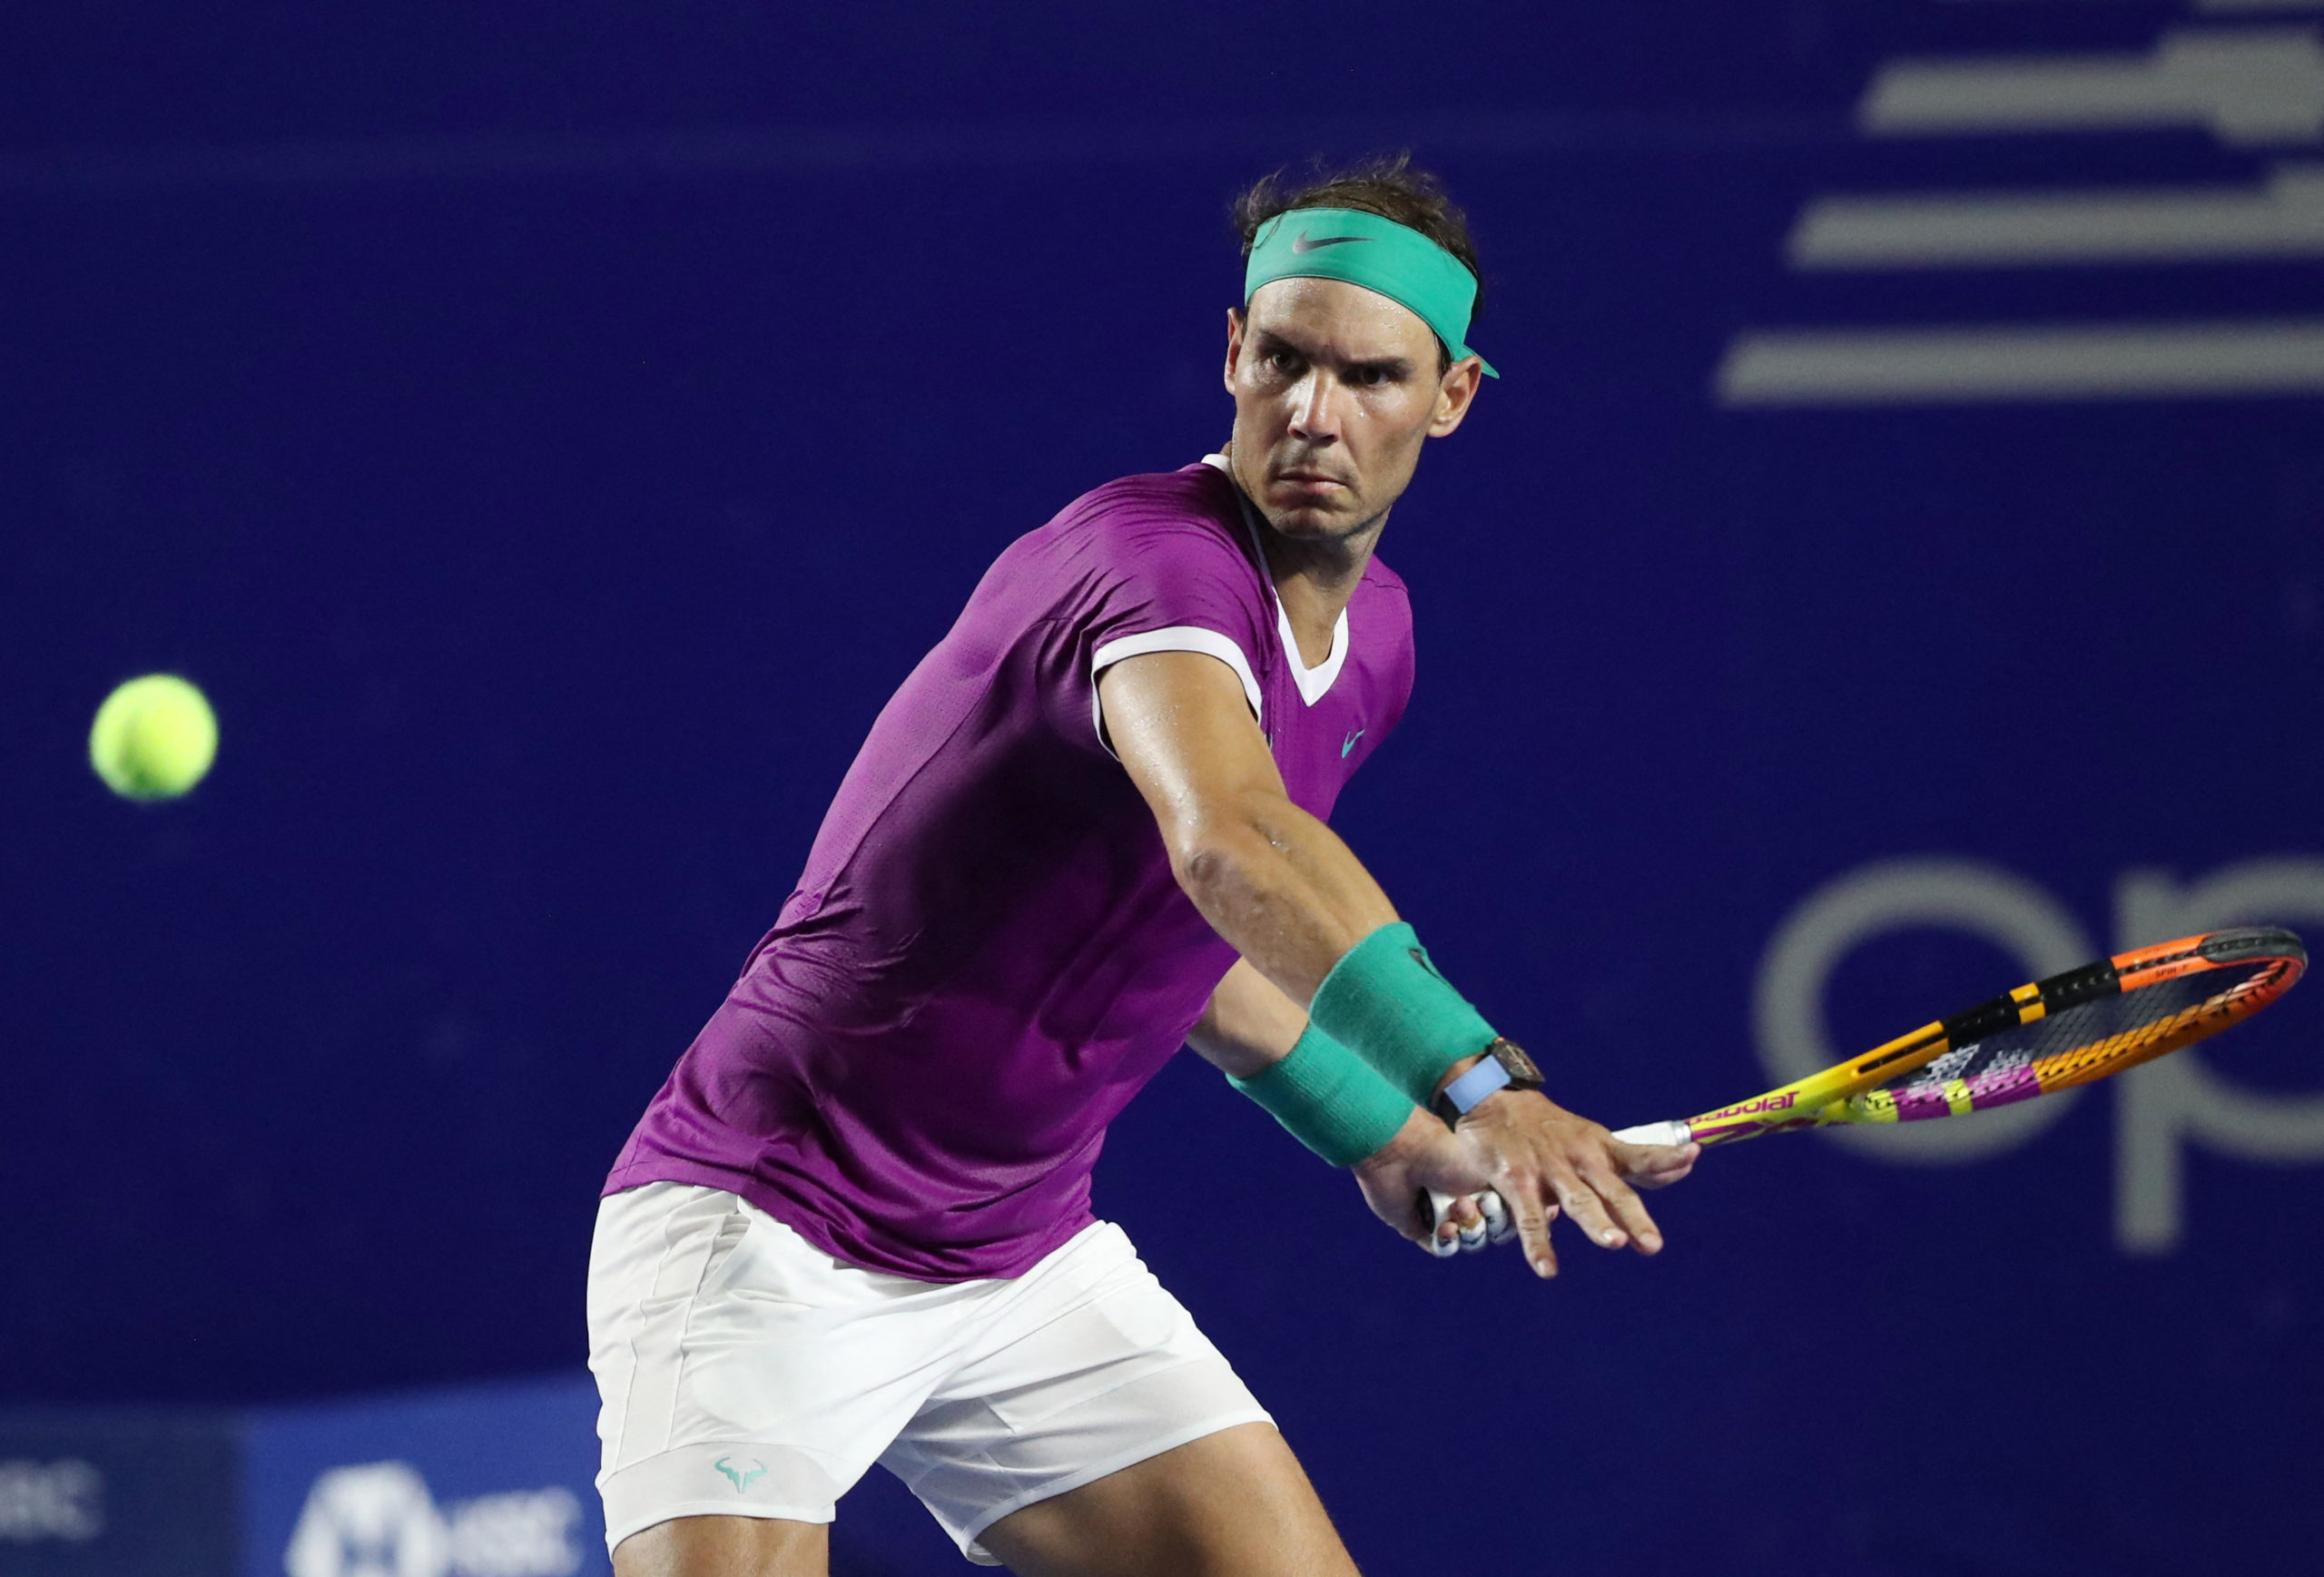 Tennis - ATP 500 - Abierto Mexicano - The Fairmont Acapulco Princess, Acapulco, Mexico - February 23, 2022 Spain's Rafael Nadal in action during his round of 16 match against Stefan Kozlov of the U.S.